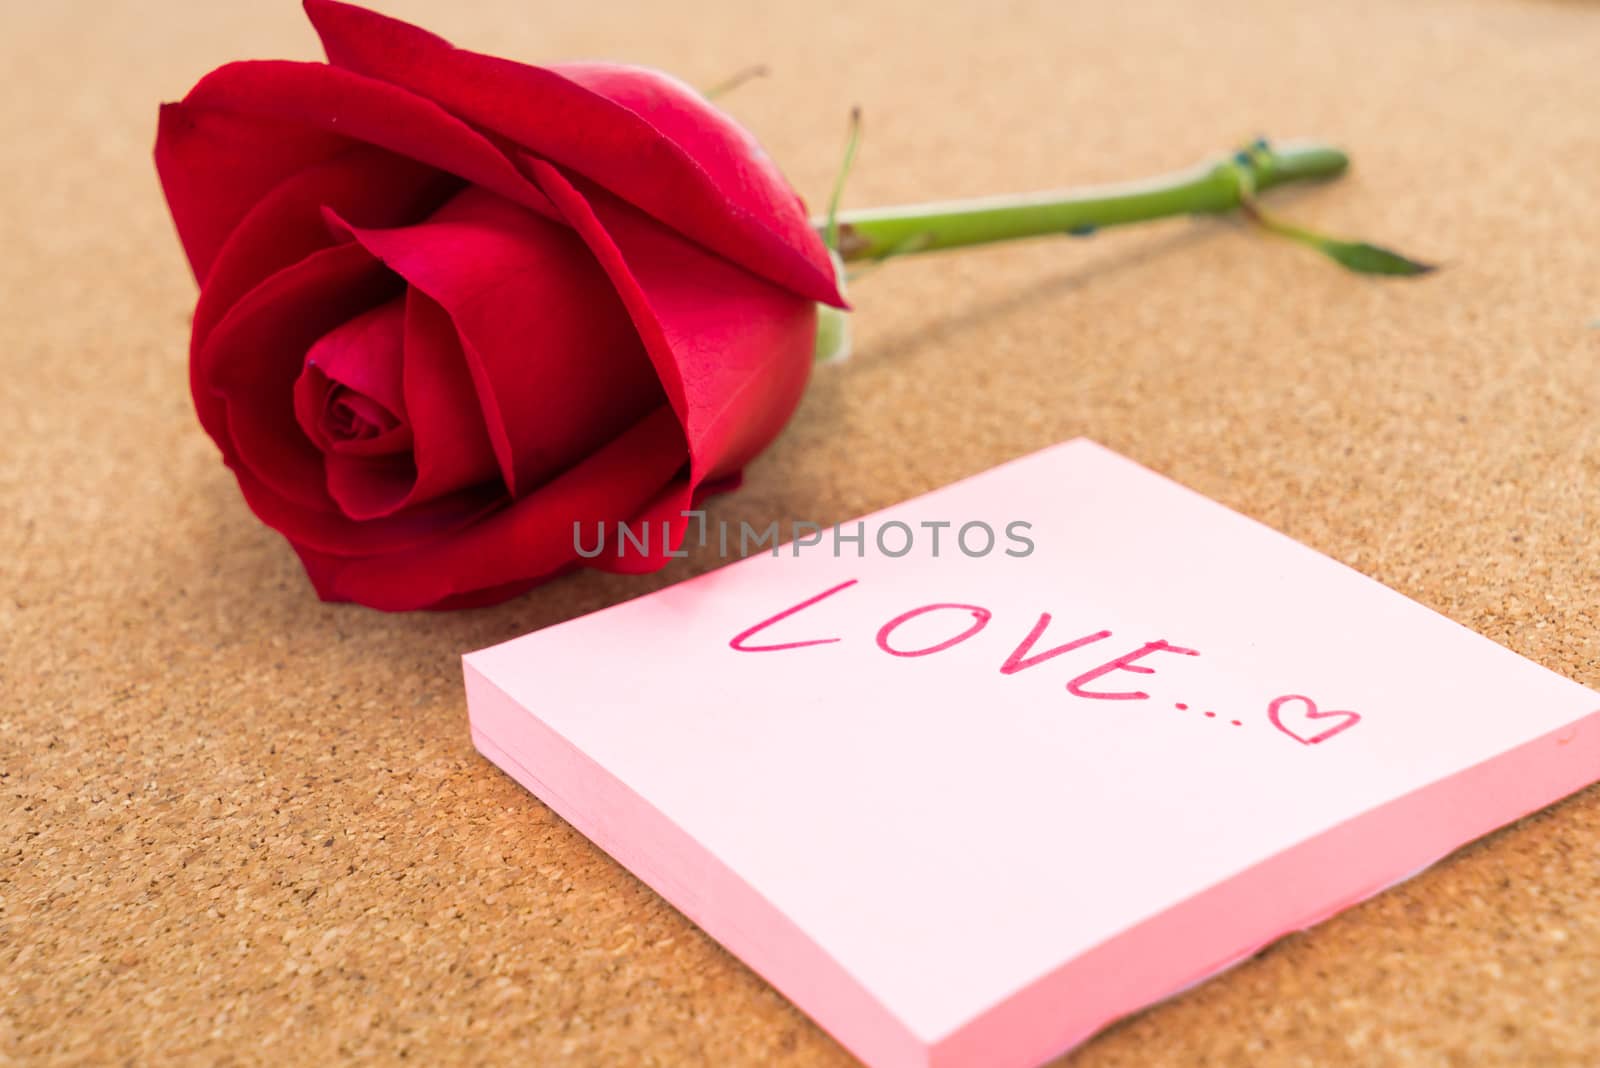 Single red rose with post it with word "love", corkboard backgro by iamway